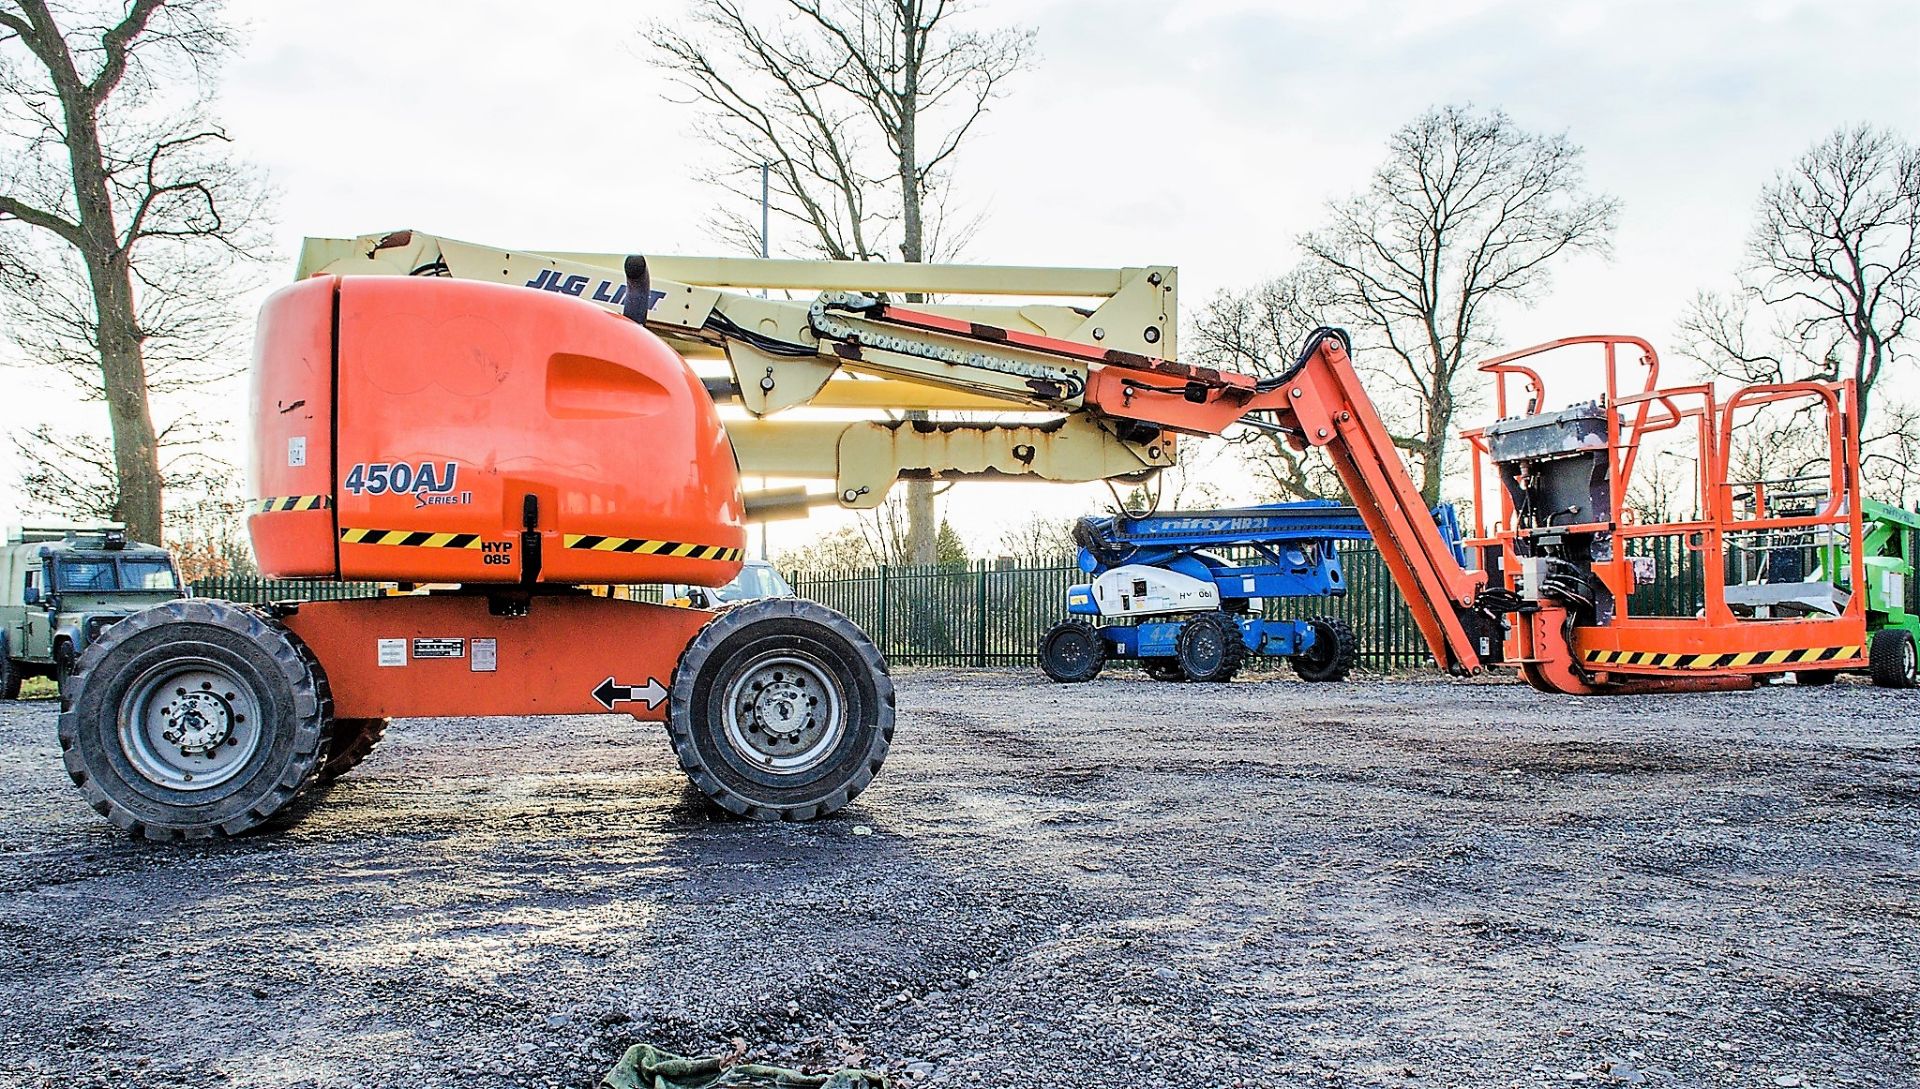 JLG 450AJ diesel driven rough terrain articulated boom access platform Year: 2007 S/N: 5190 Recorded - Image 8 of 17